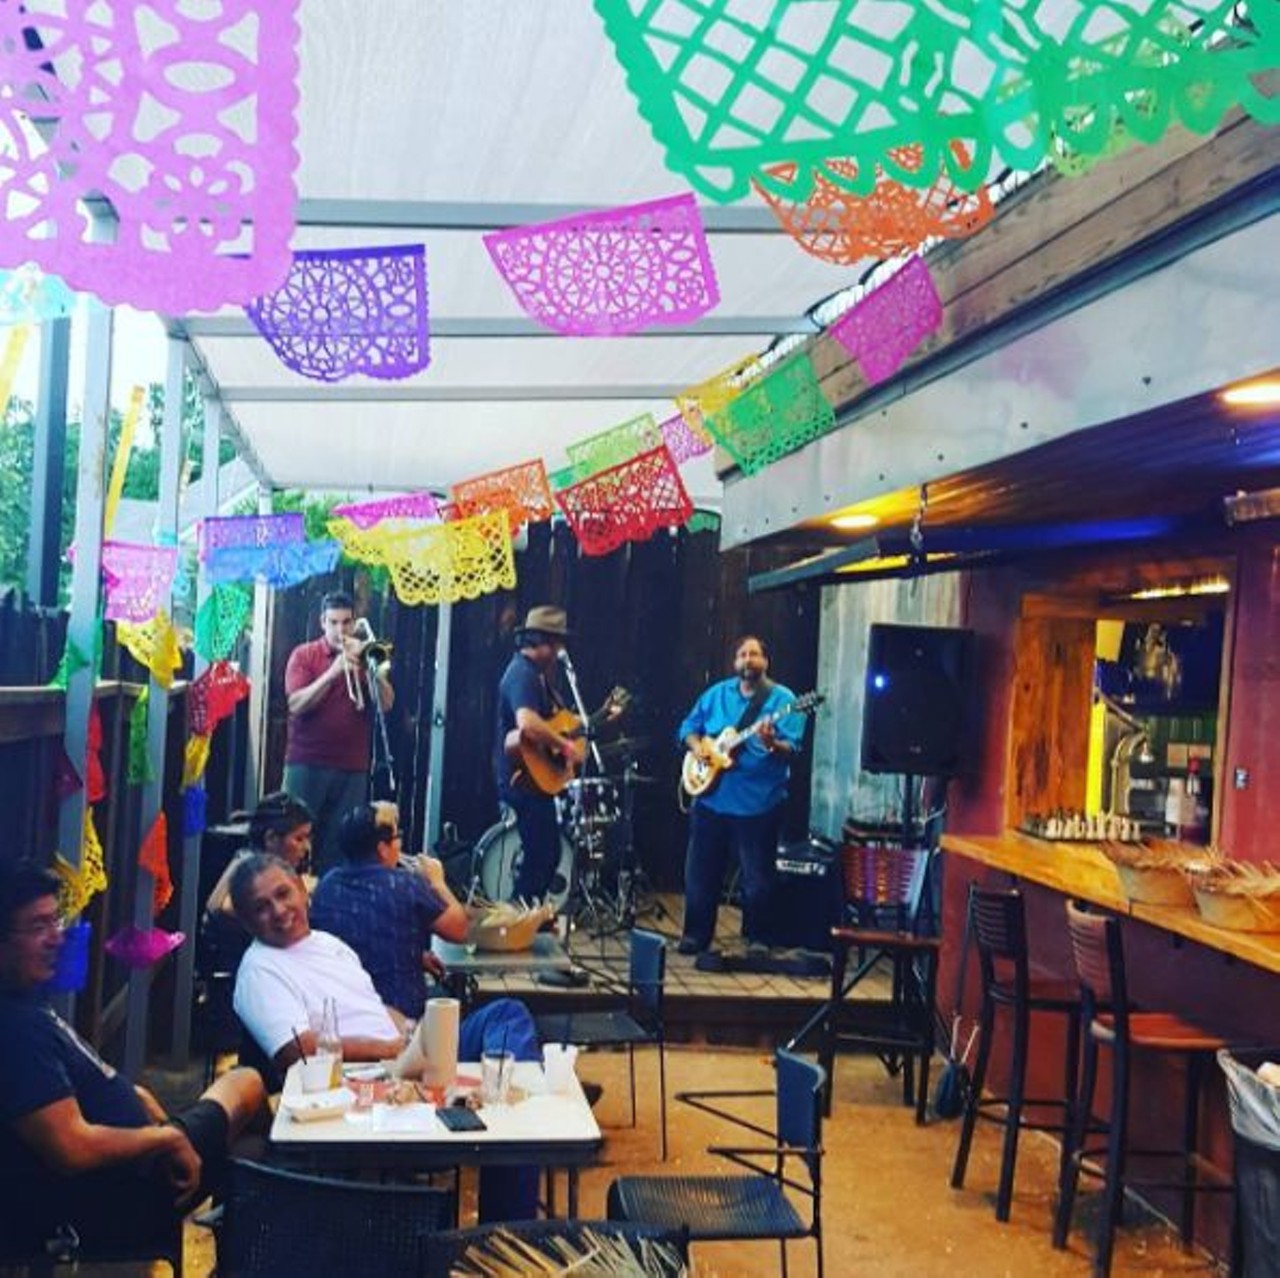 Sancho&#146;s Cantina & Cocina
628 Jackson St., (210) 320-1840, sanchosmx.com
If you can&#146;t increase your footprint horizontally, grow up. That&#146;s what Sanchos did and that additional rooftop patio makes this tiny bar a go-to. 
Photo via Instagram,  adventure_girl143